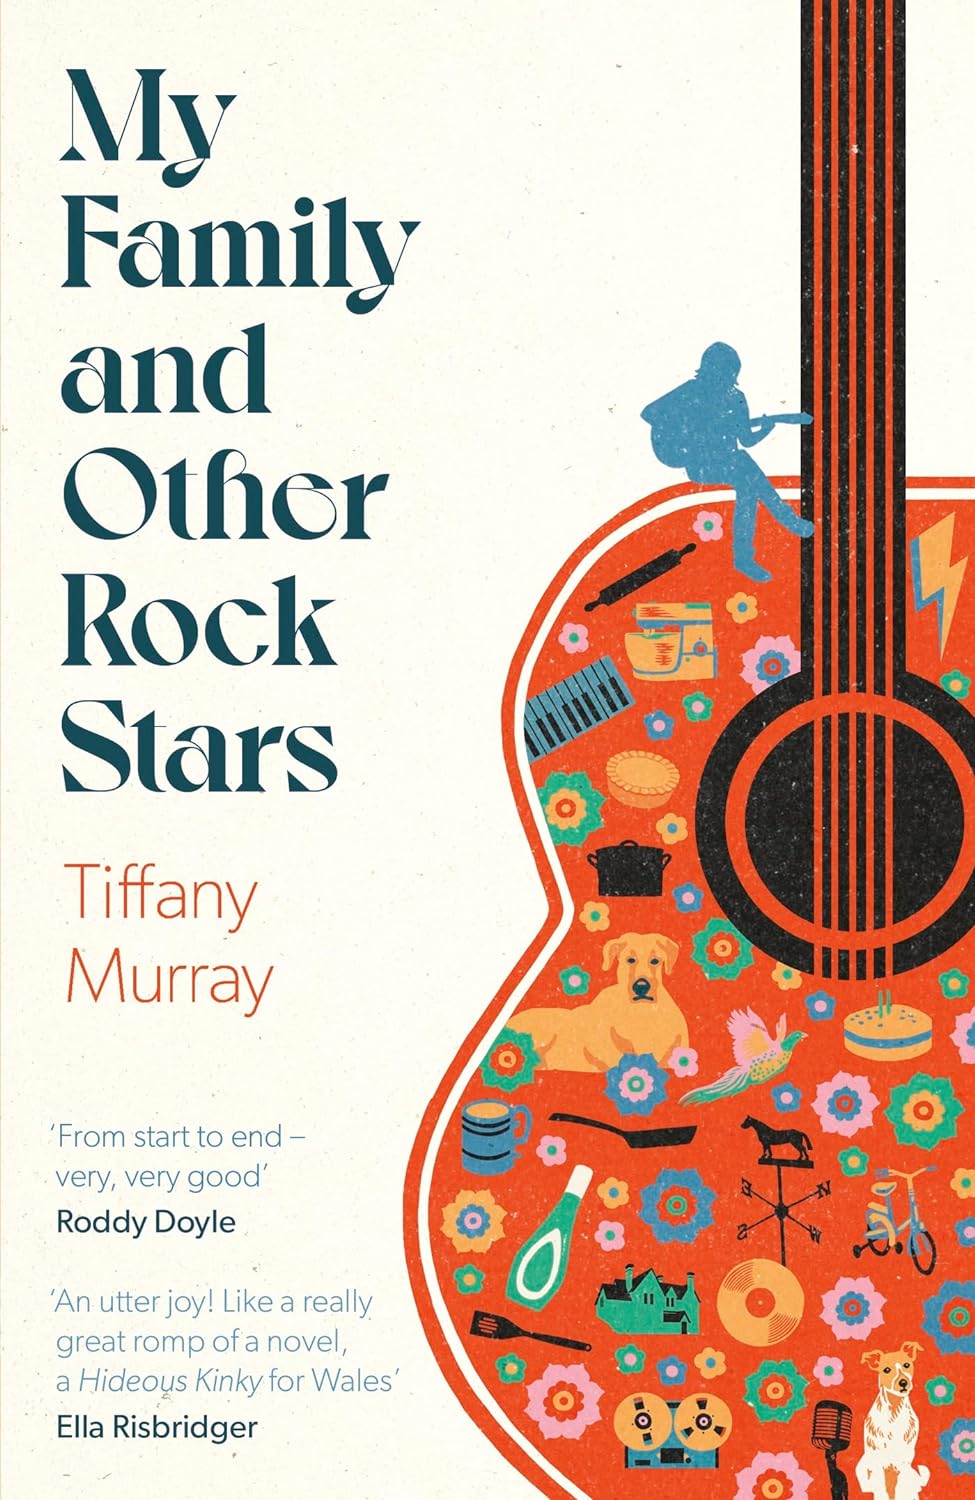 My_Family_and_other_rock_stars_book_cover